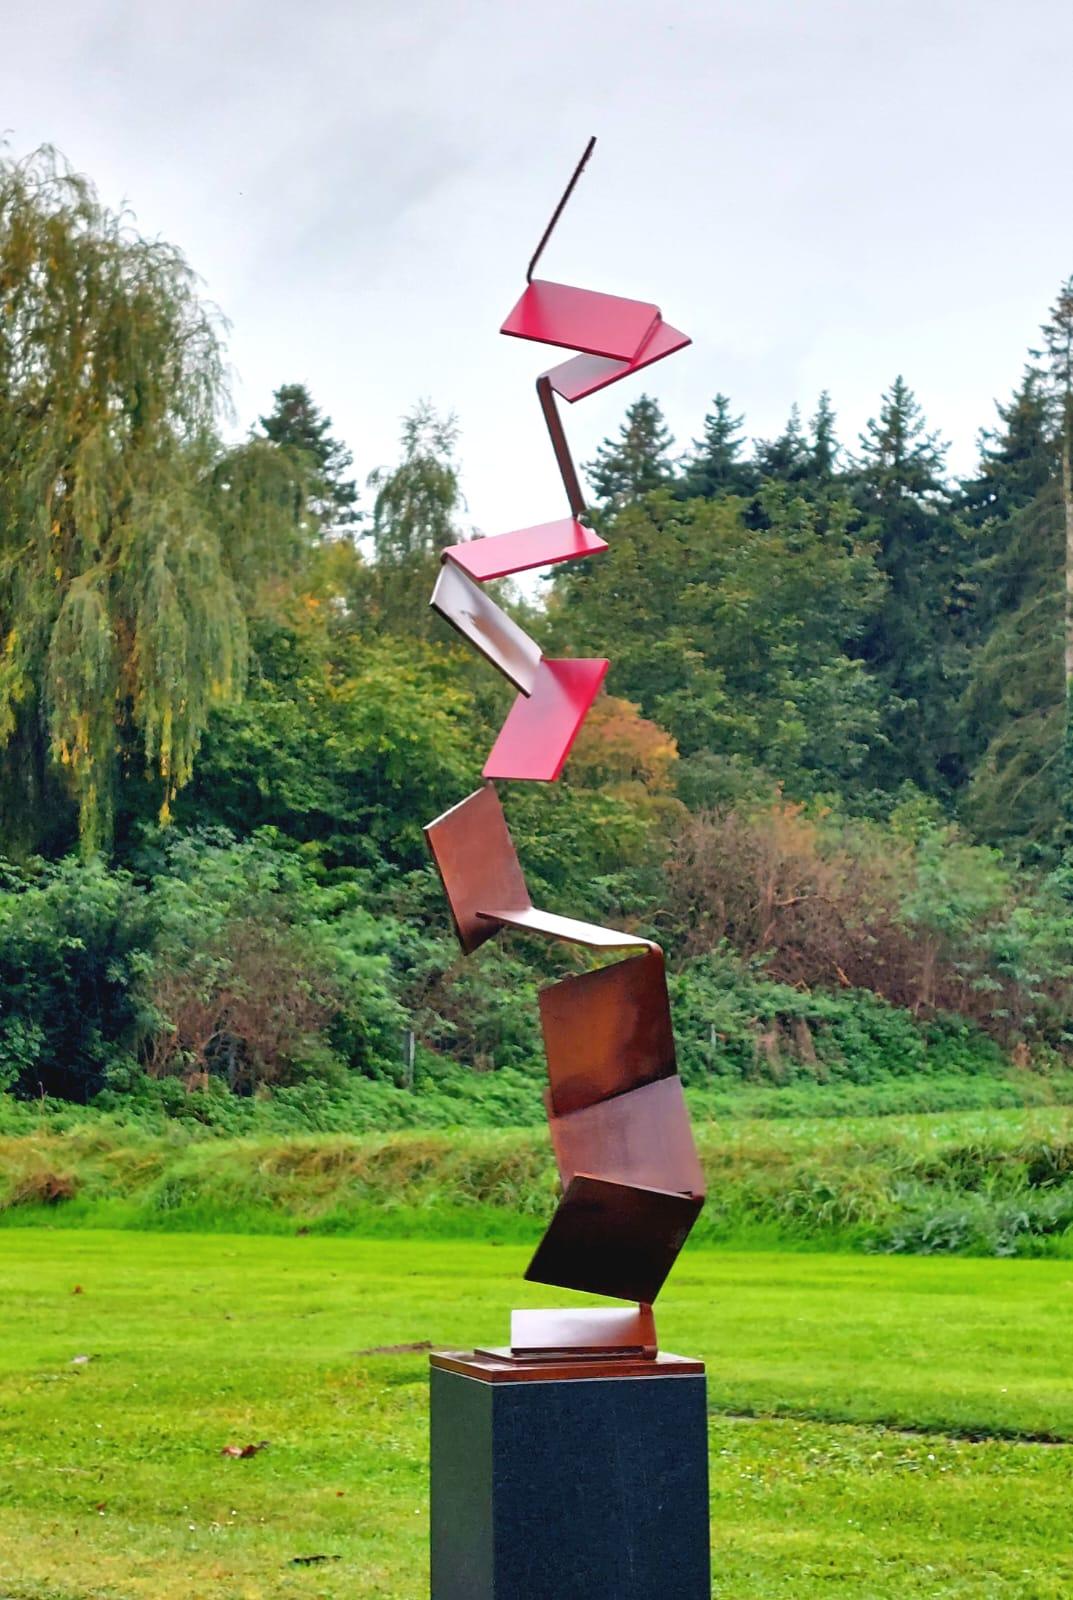 Artist: Kuno Vollet

Title: Aspiring Path

Contemporary steel sculpture for inside or garden outdoor spaces.

Stunning large artwork. Possible to put on a pedestal or directly on to the ground.

About the Gallery:
Folly and Muse was established in